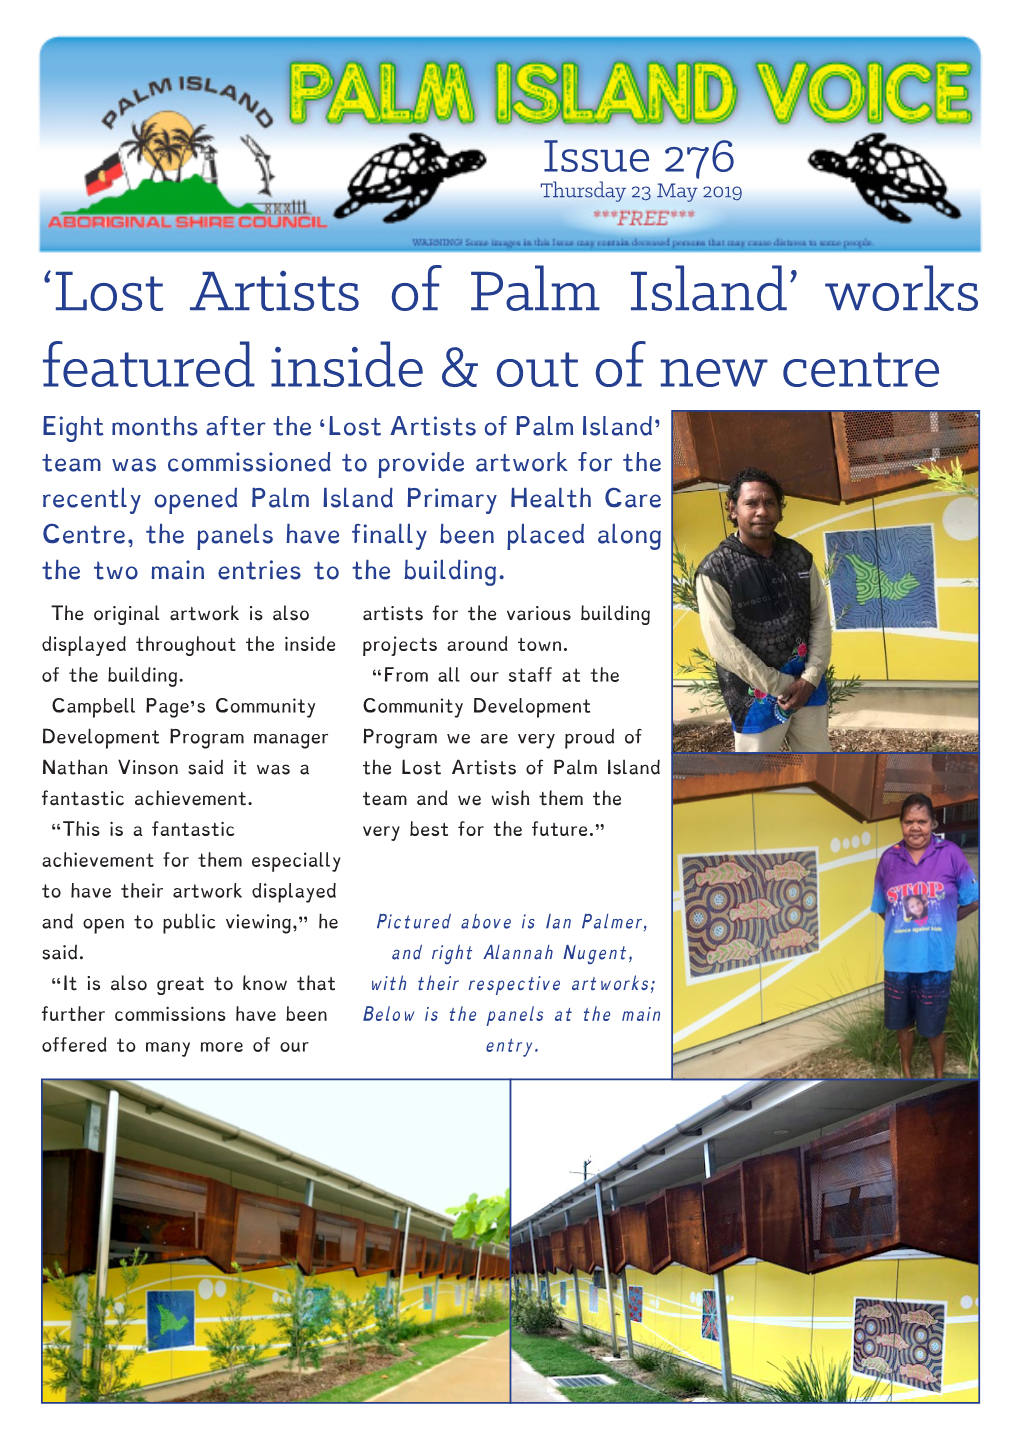 Lost Artists of Palm Island